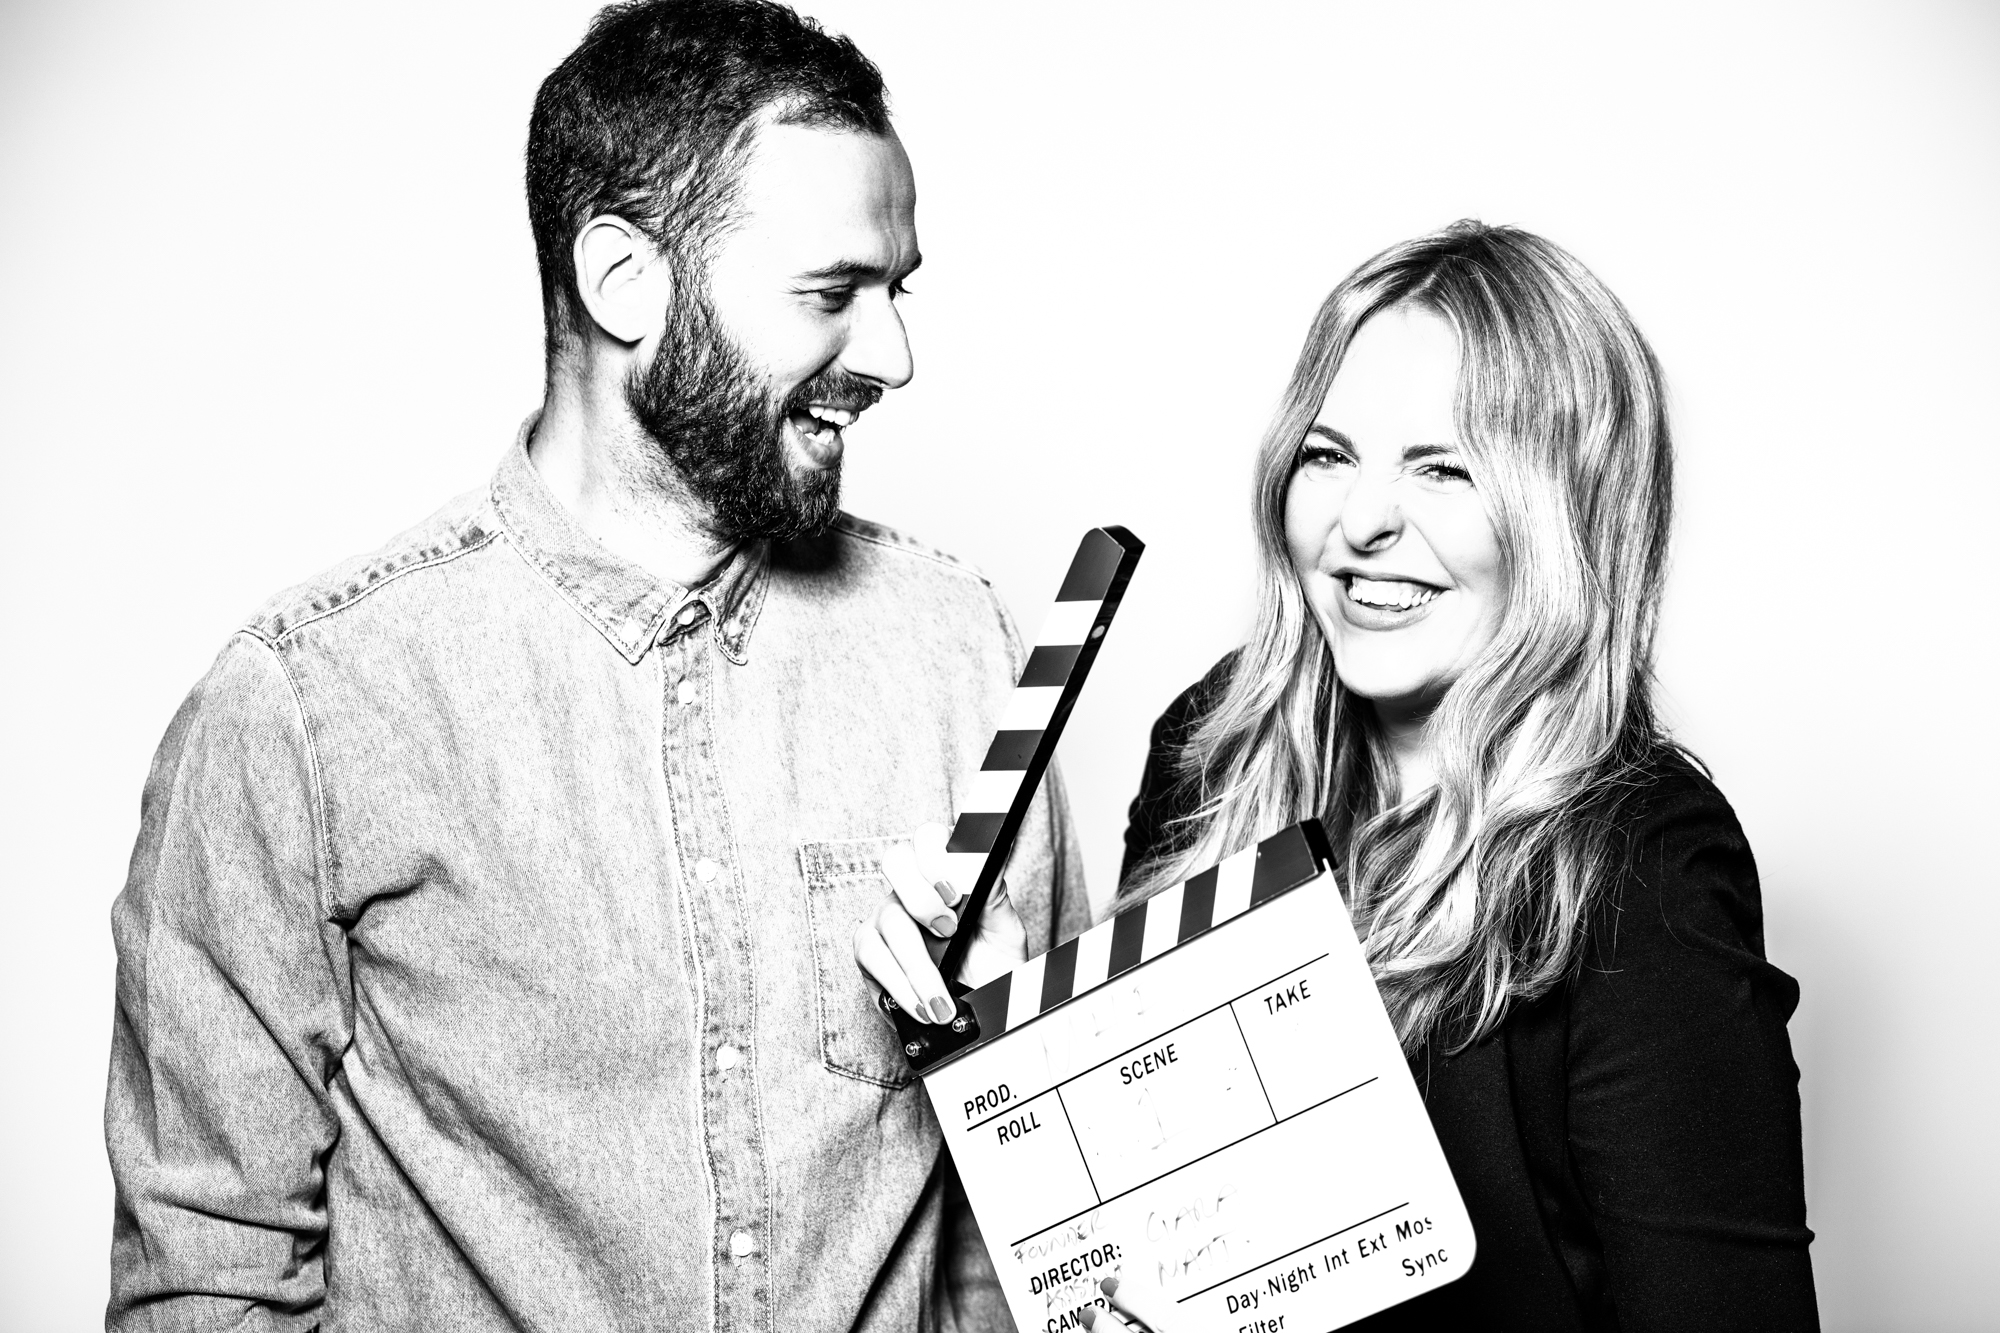 The founders of mhf creative video production company in a photo holding a clapperboard